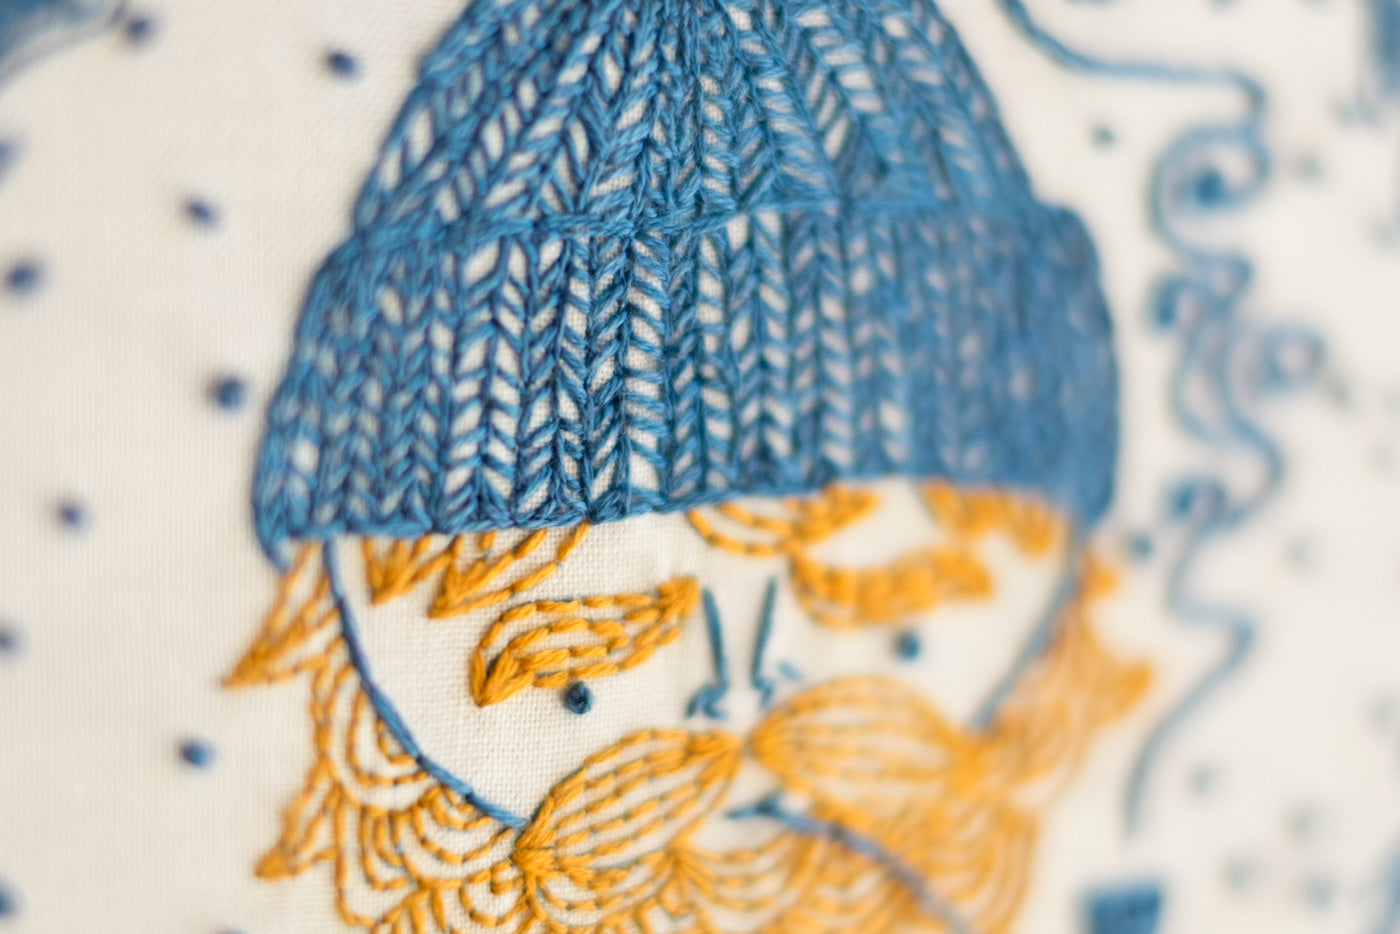 Detail of the Sea Captain's Hat